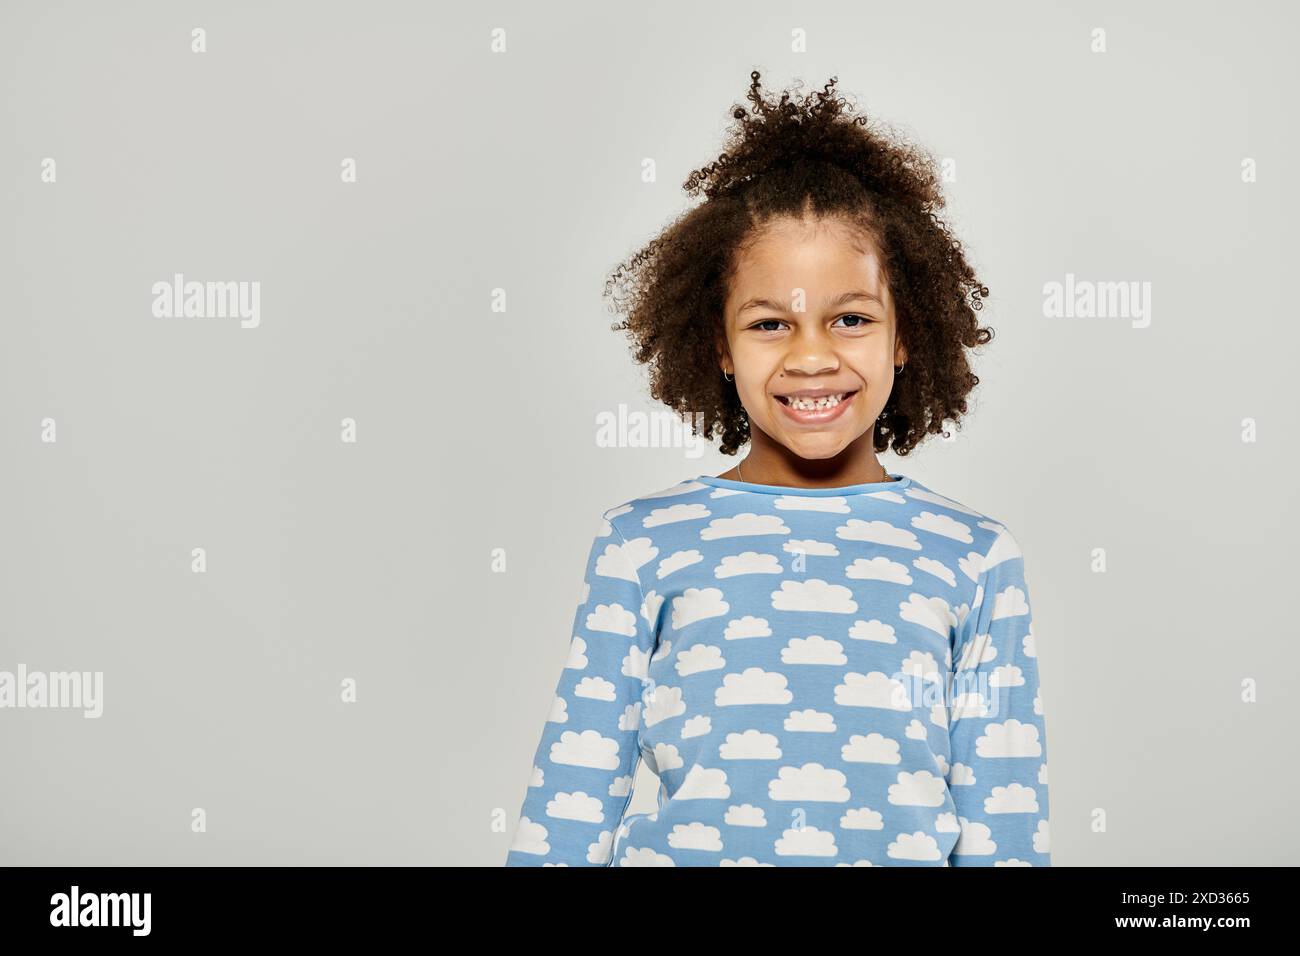 A young African American girl happily wearing a blue shirt with clouds pattern, posing on a grey background. Stock Photo